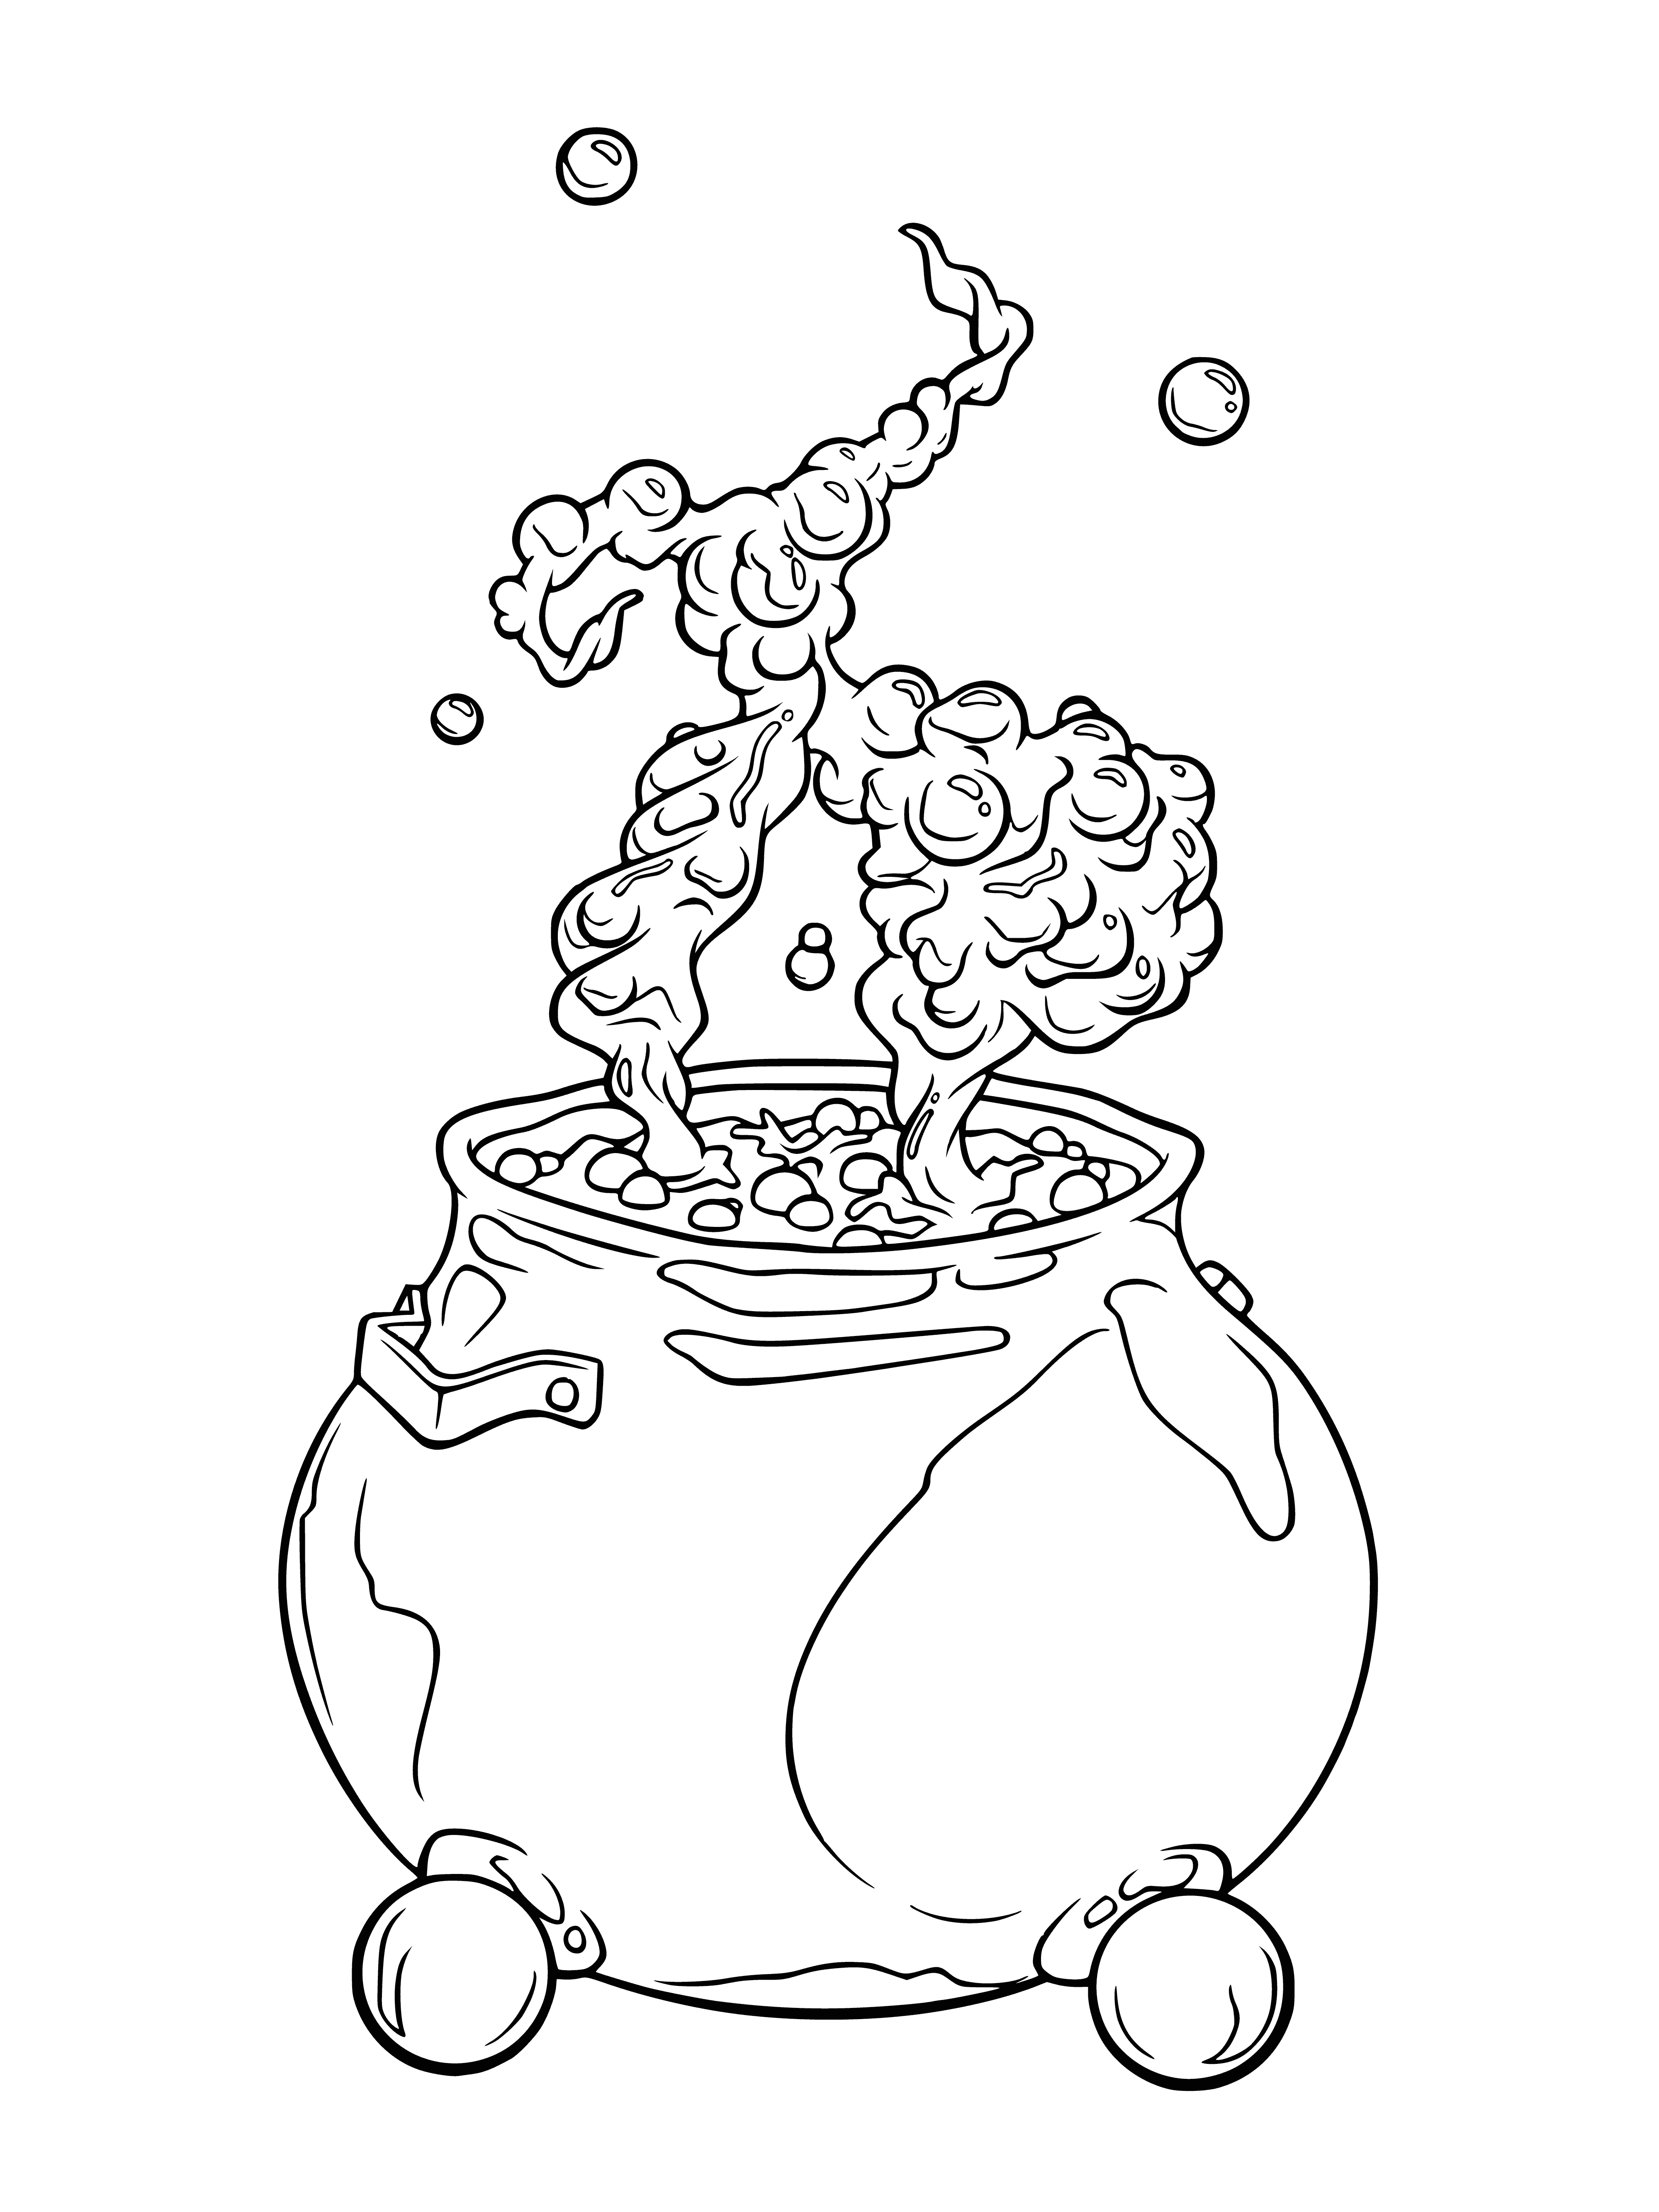 coloring page: An old witch is stirring the cauldron, adding ingredients from bottles and jars to brew a mysterious potion.